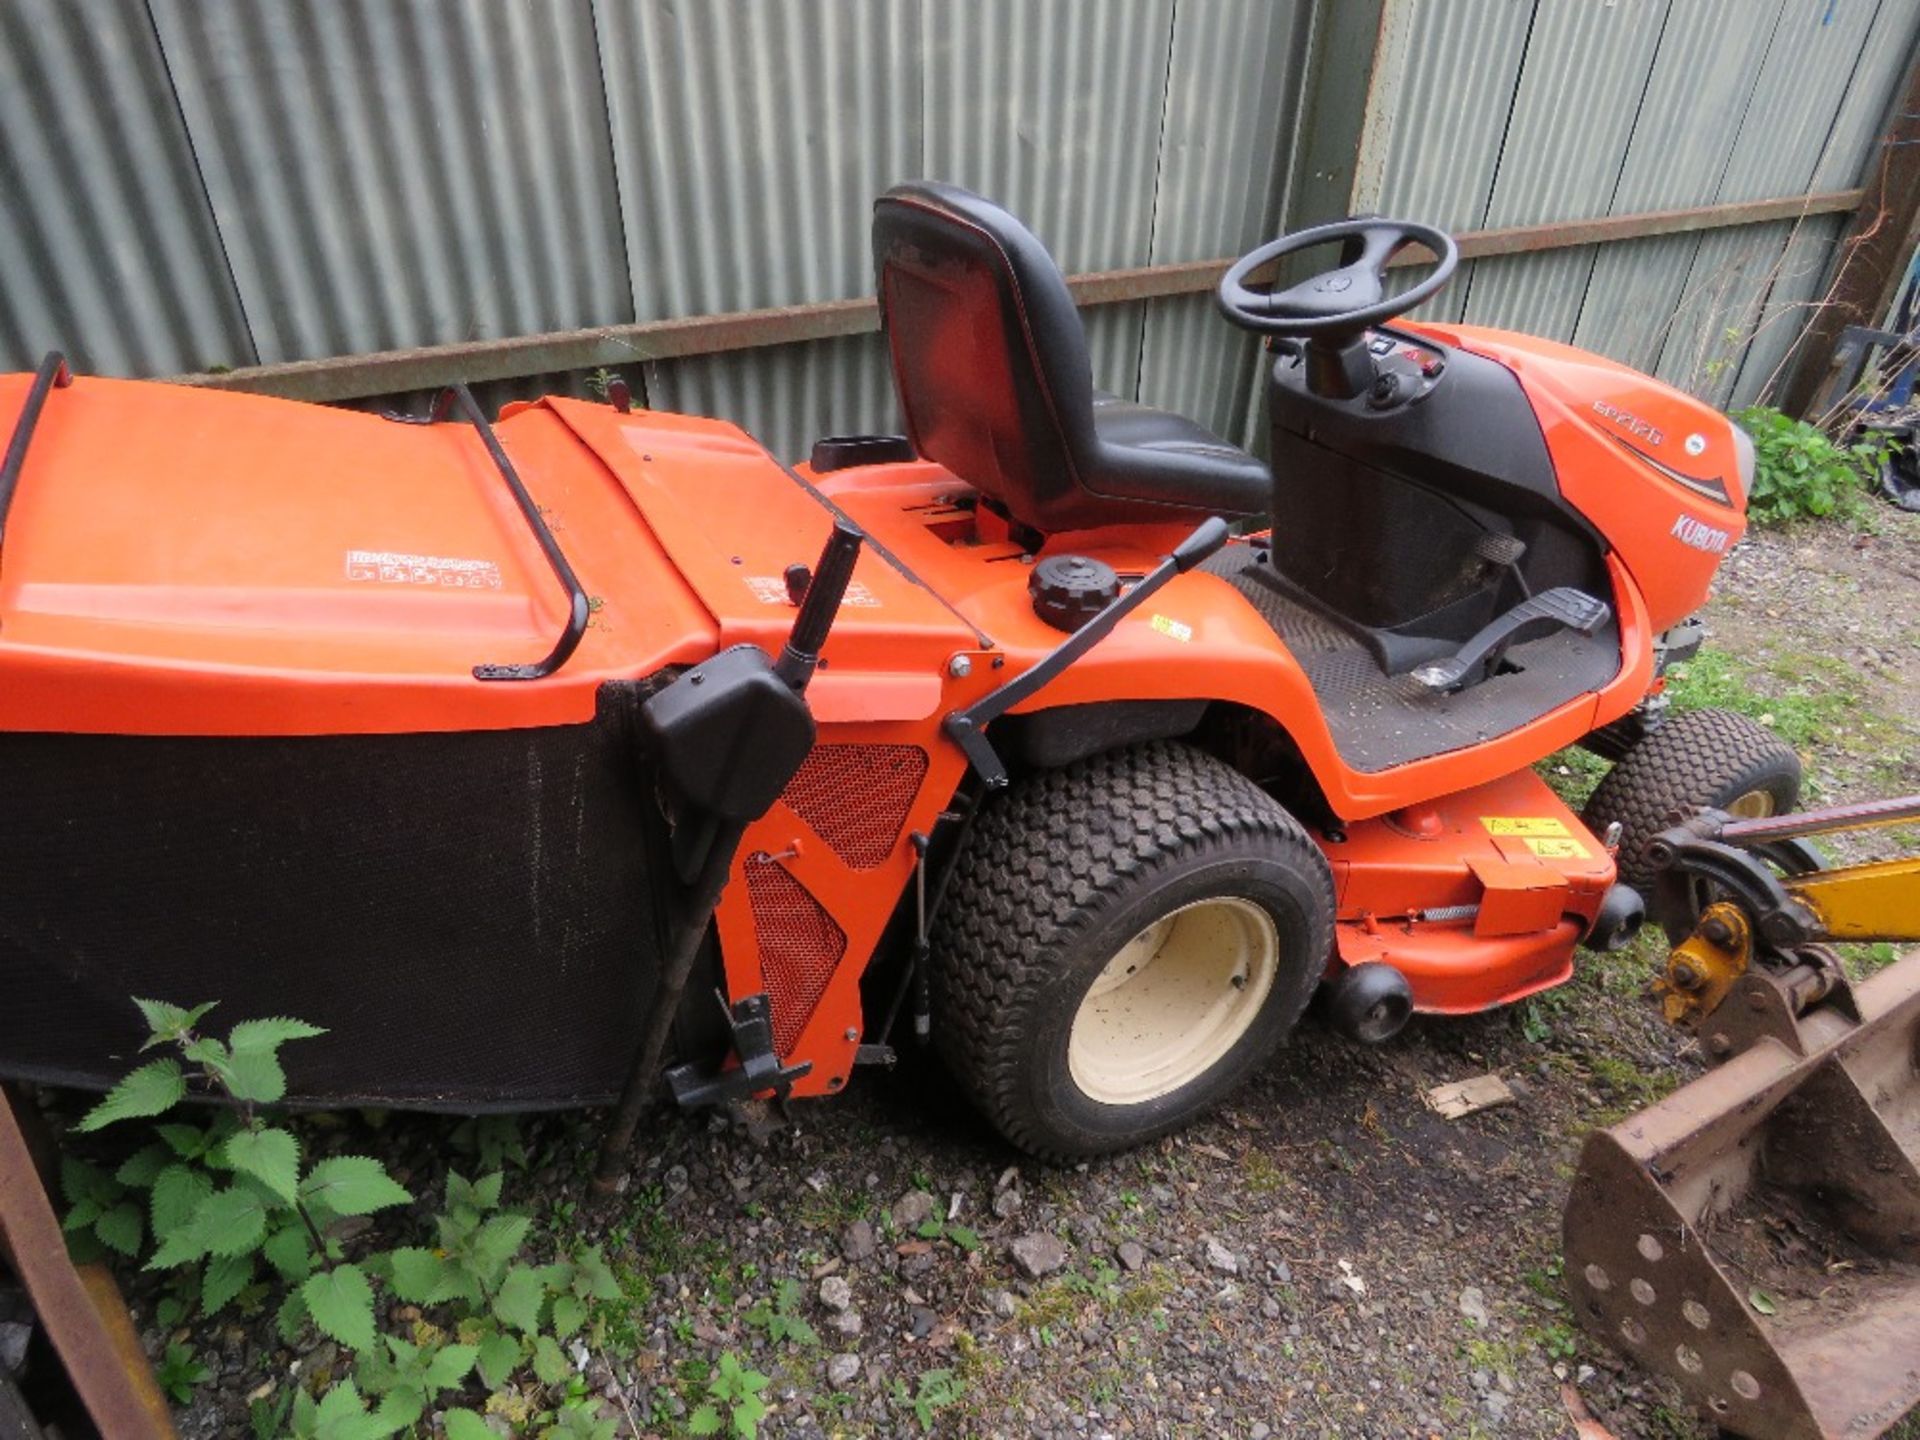 BID INCREMENT NOW £100!! KUBOTA GR2120 DIESEL ENGINED MOWER WITH REAR COLLECTOR, 4WD. - Image 4 of 11